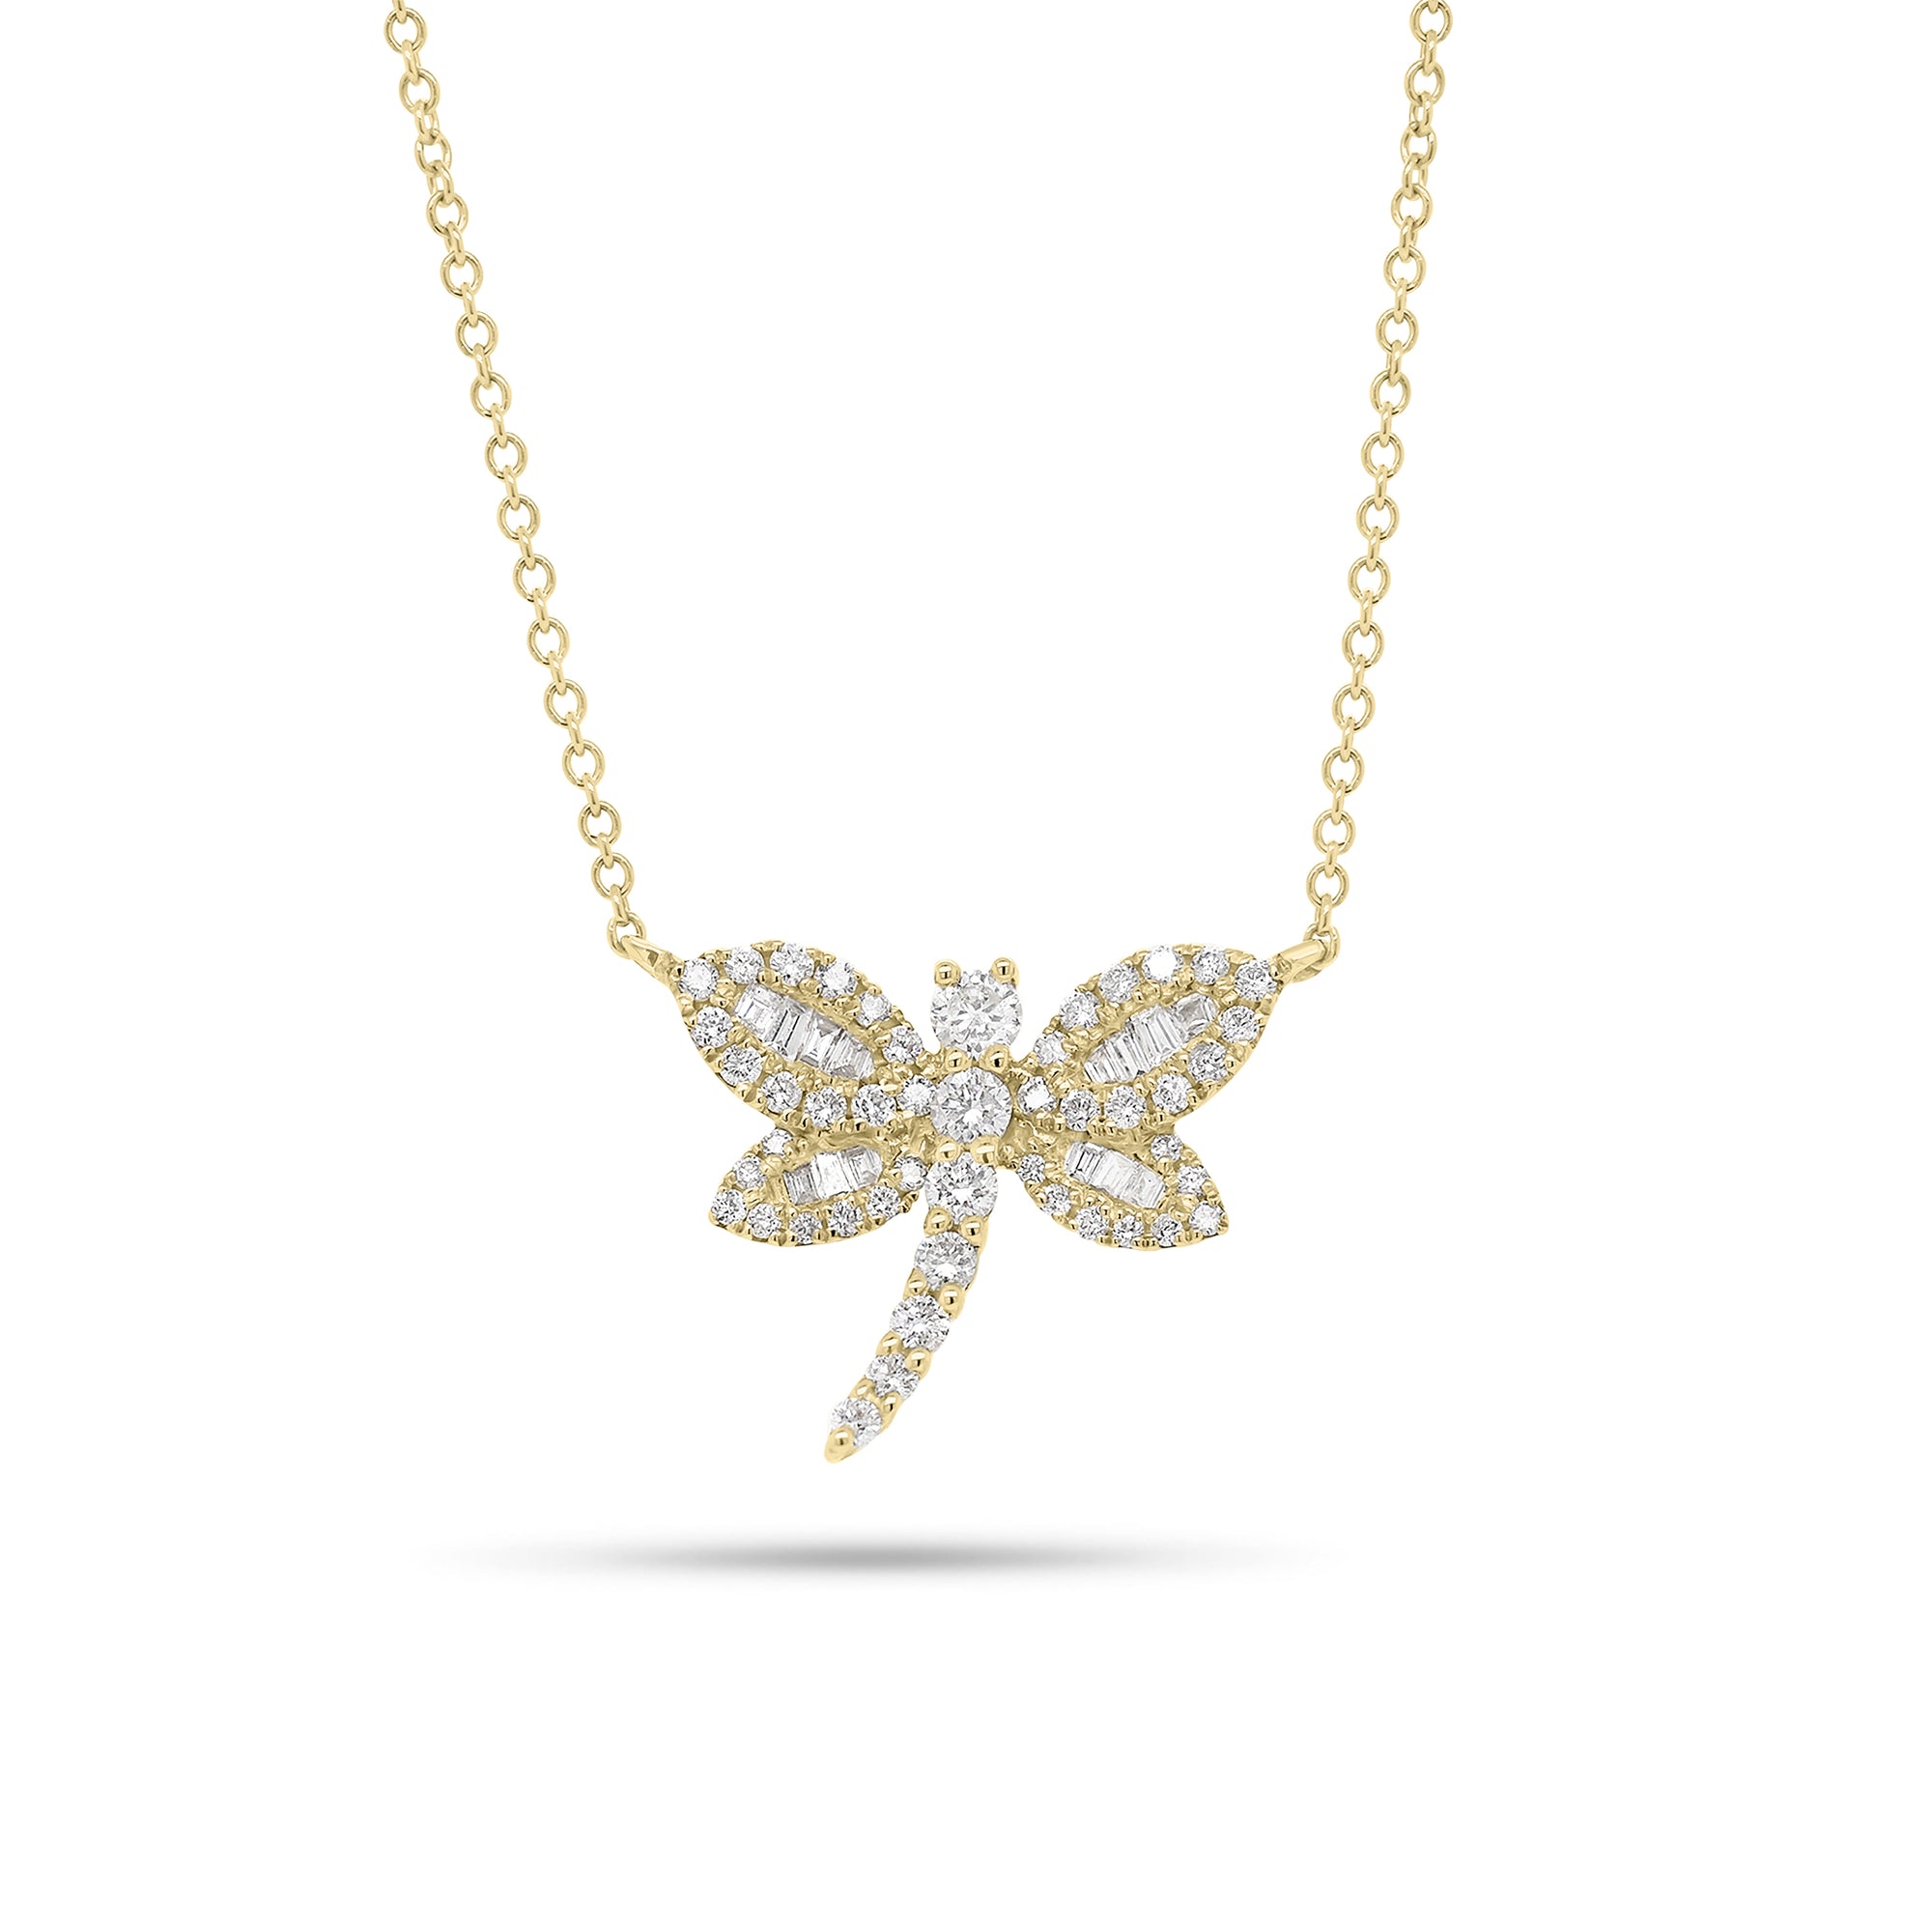 Baguette & Round Diamond Dragonfly Pendant Necklace - 14K gold weighing 2.28 grams  - 49 round diamonds weighing 0.28 carats  - 14 straight baguettes weighing 0.07 carats